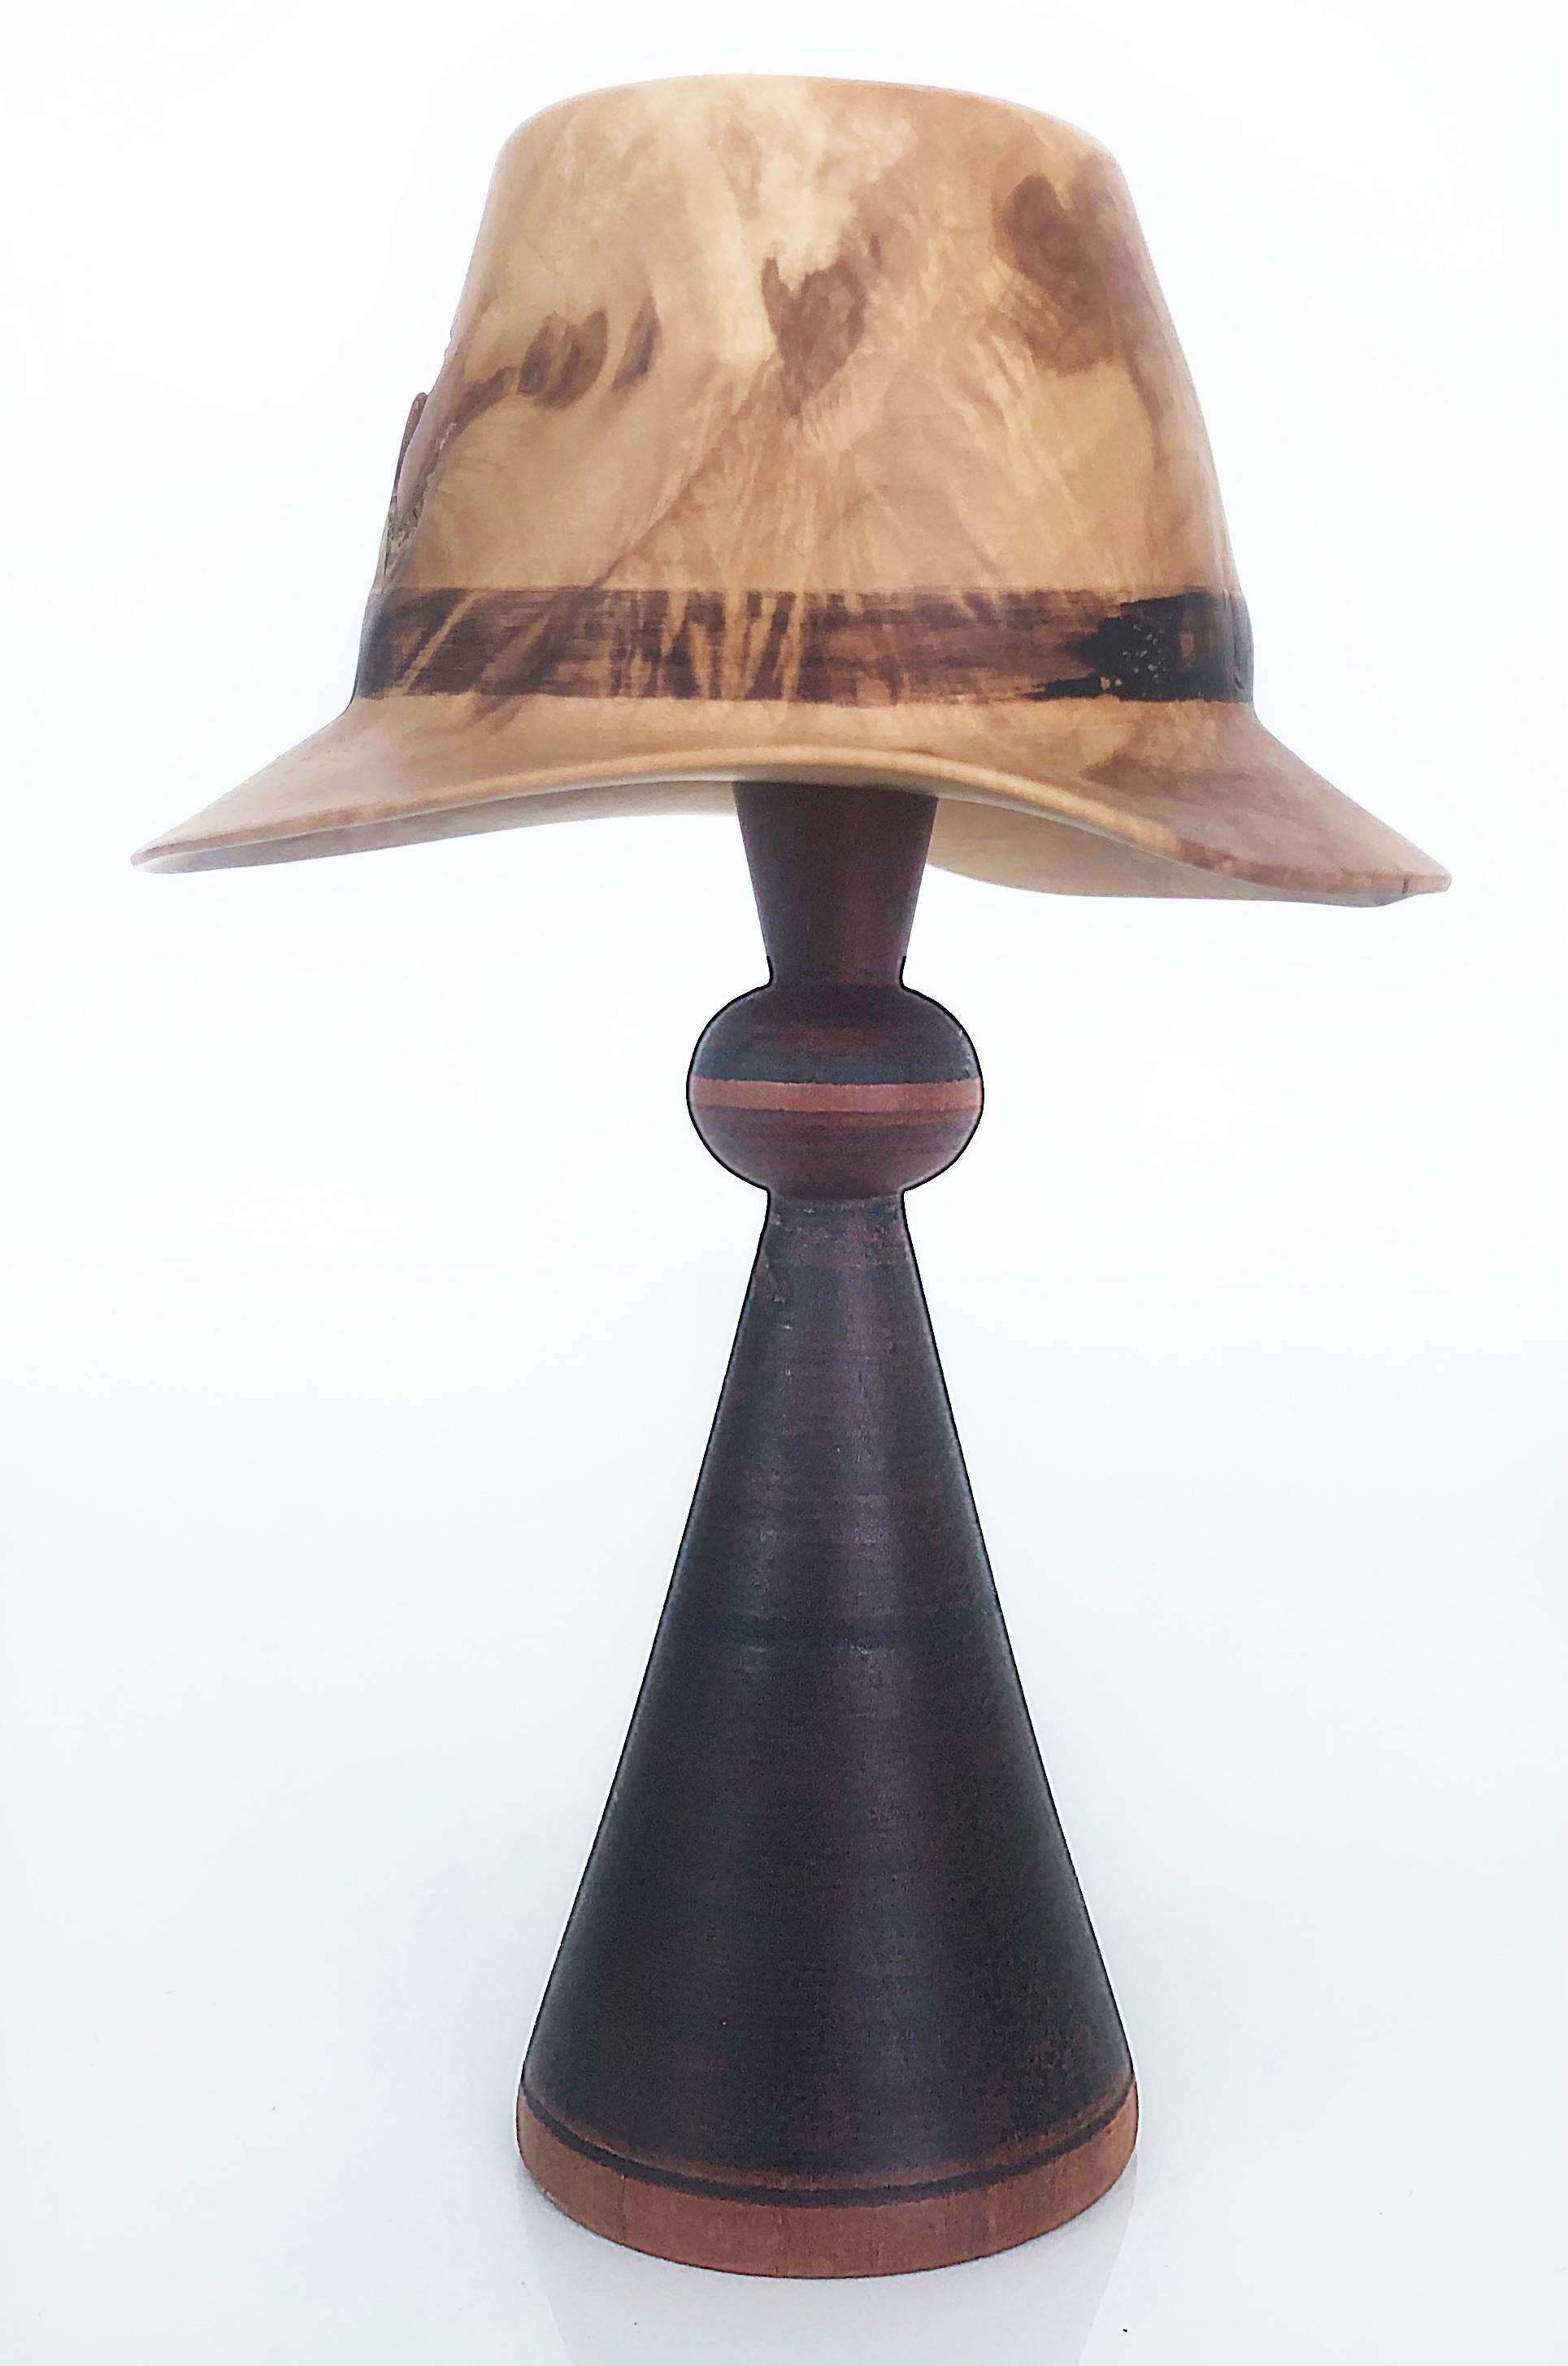 Johannes Michelsen turned pair of wood Hats on stands, signed and dated 

 Offered for sale is a pair of miniature Johannes Michelsen American studio wood-turned hats on stands. The handcrafted wood hats rest on the artist's hand-made turned wood